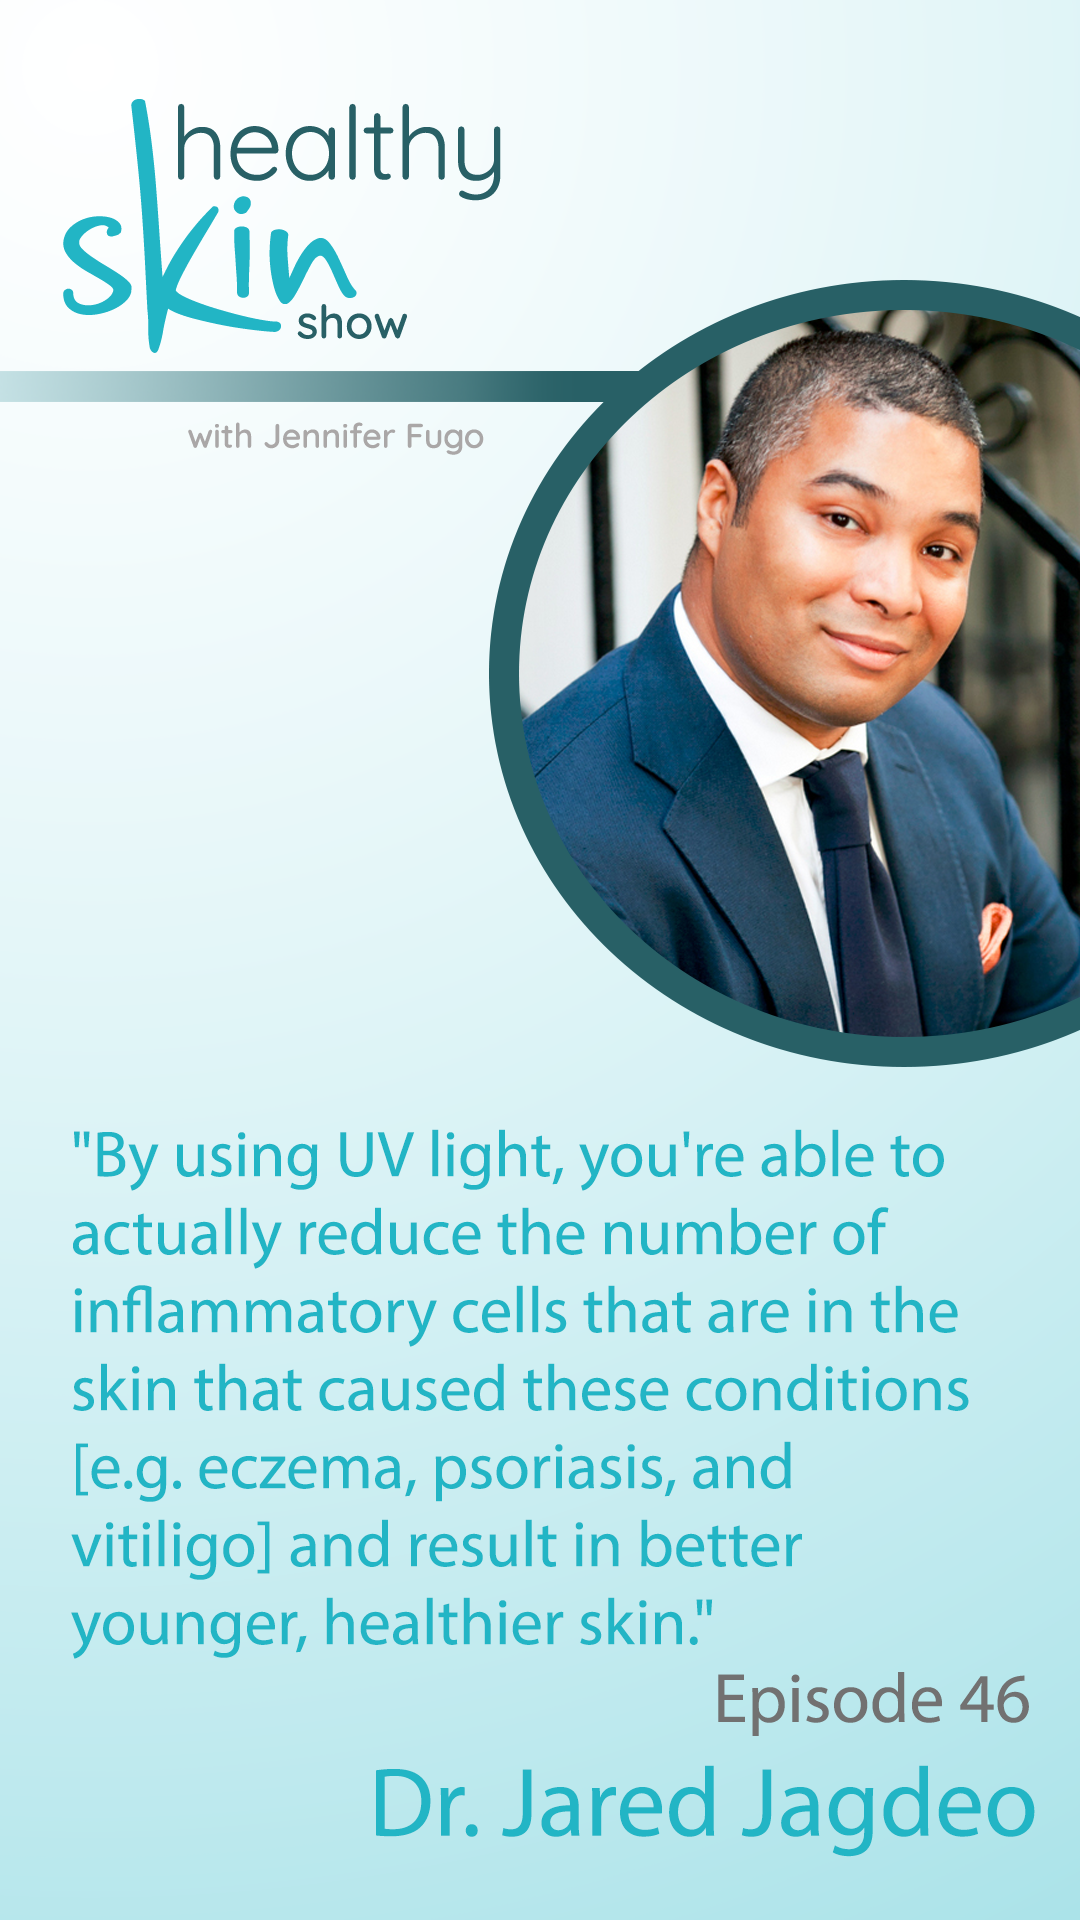 "By using UV light, you're able to actually reduce the number of inflammatory cells that are in the skin that caused these conditions [e.g. eczema, psoriasis, and vitiligo] and result in better younger, healthier skin."